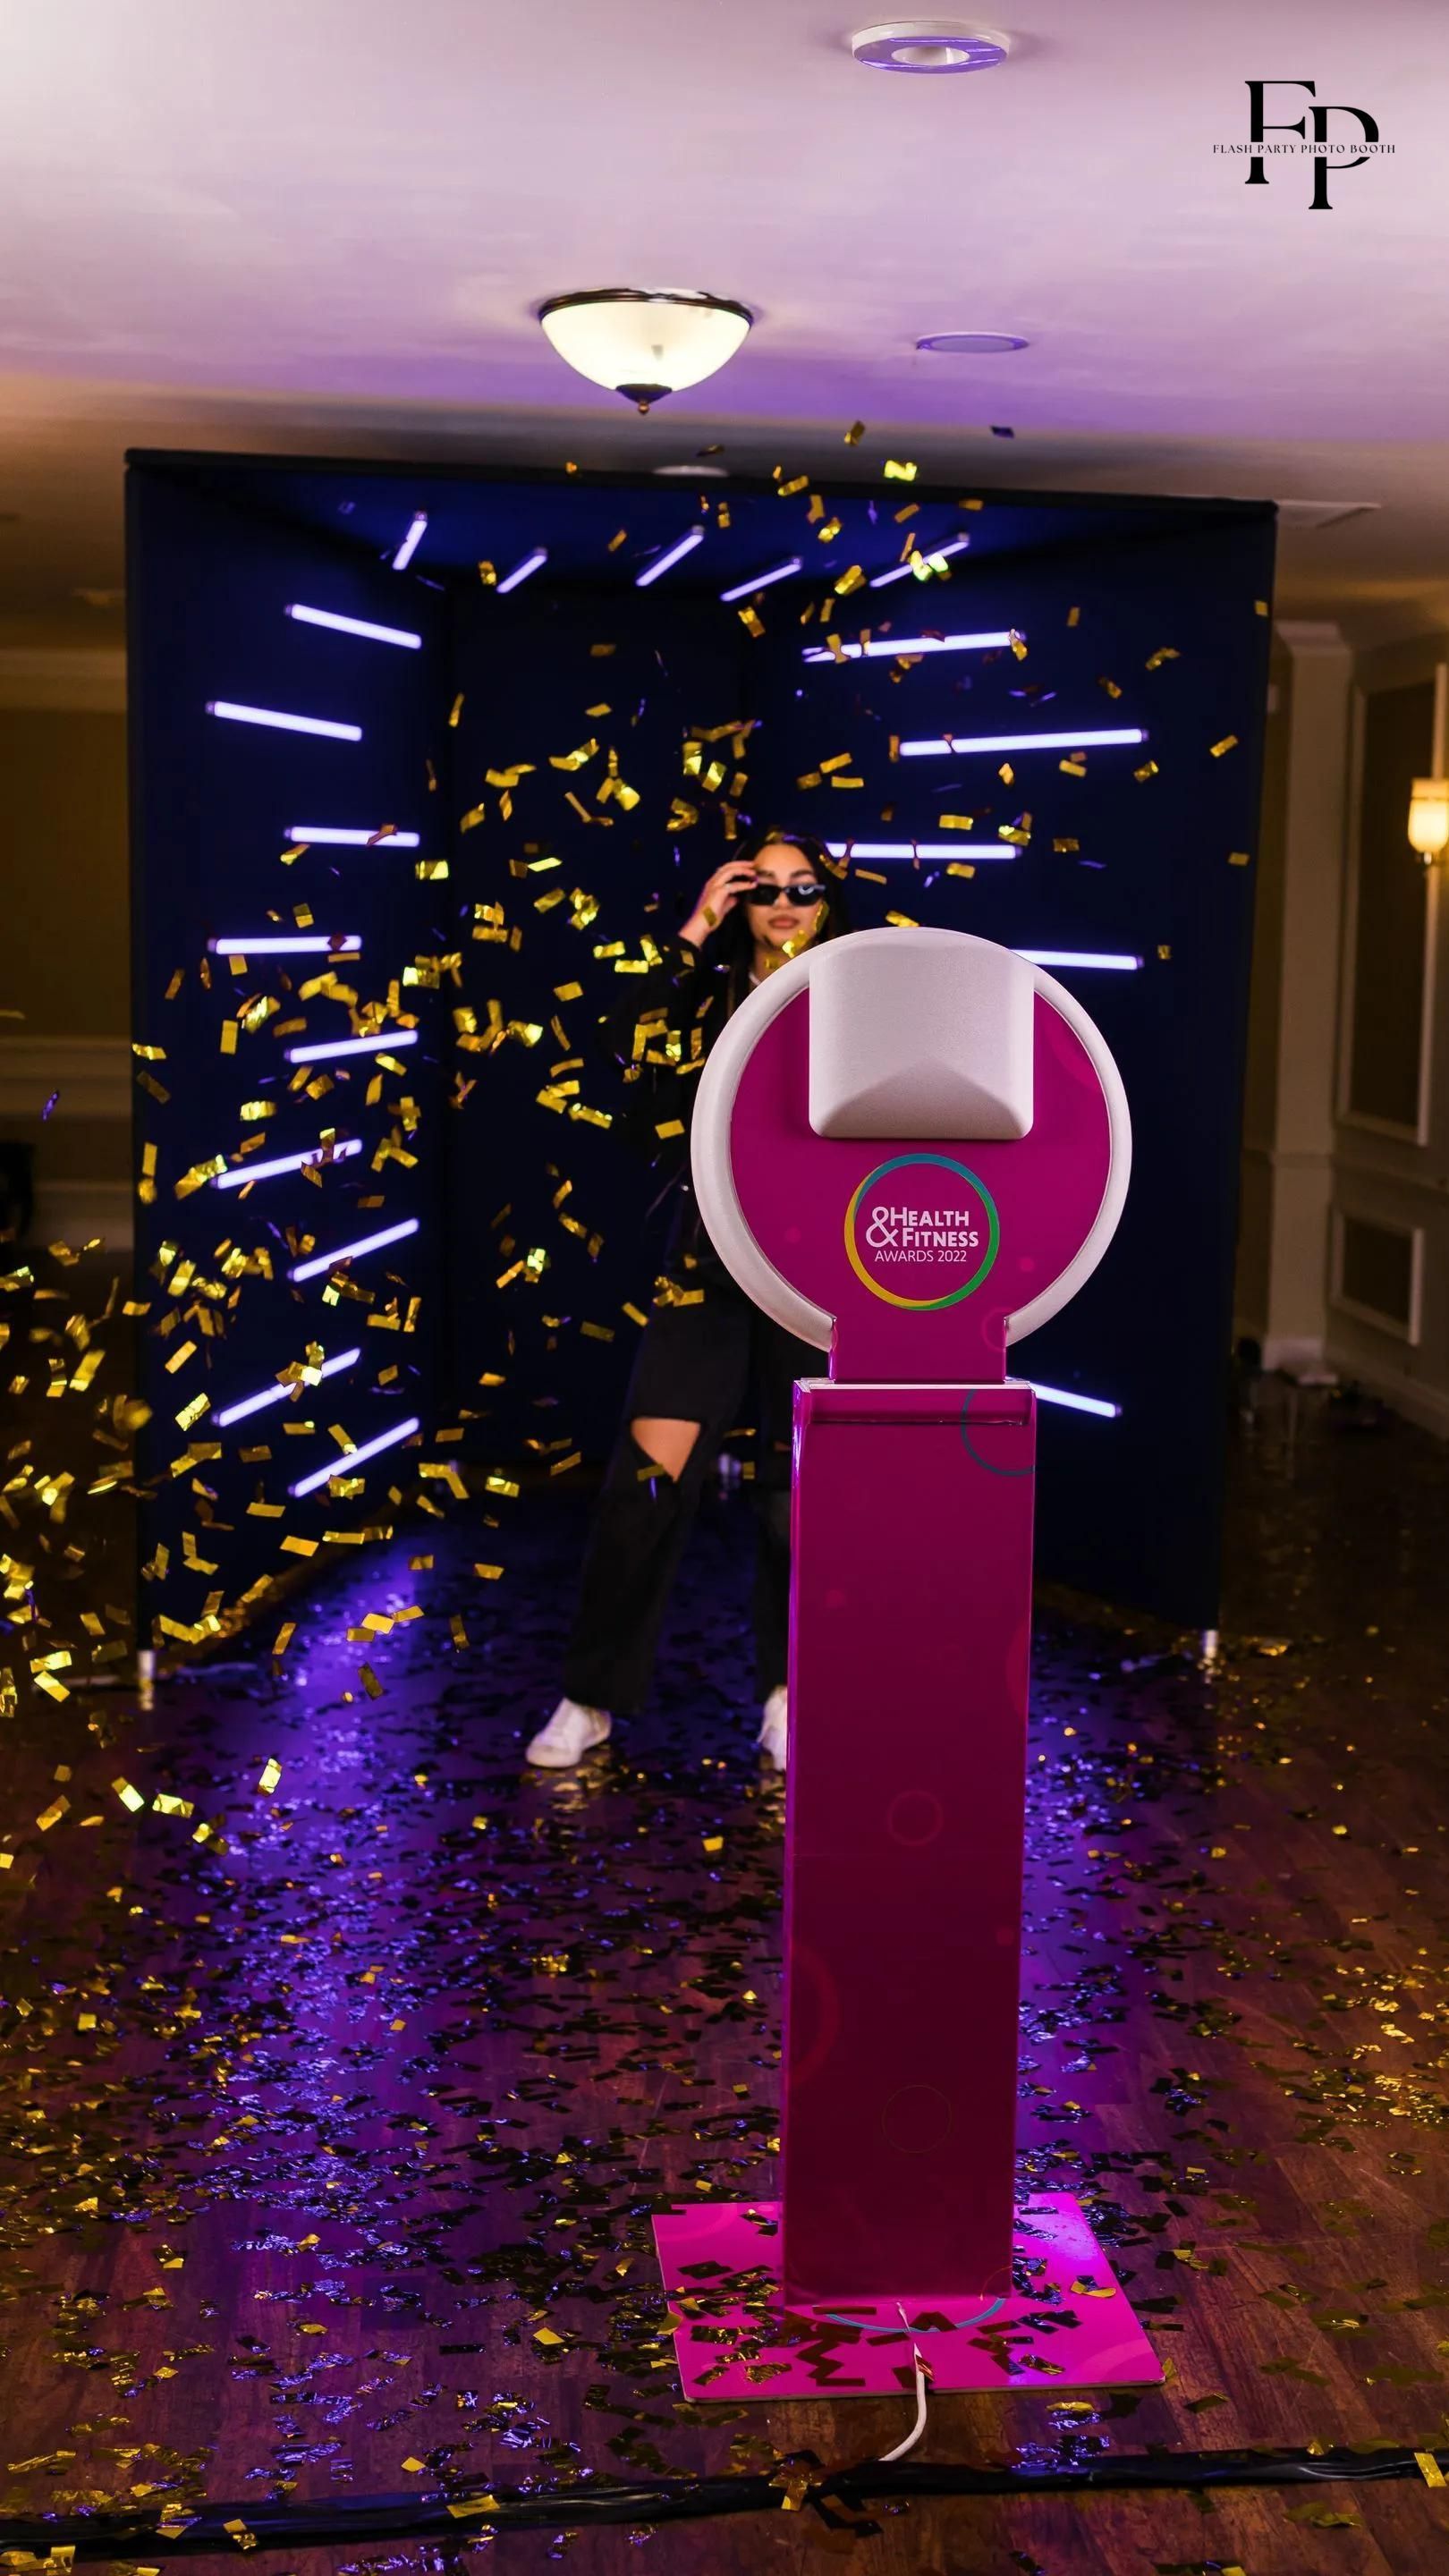 A person standing in front of a pink Selfie Photo Booth with confetti falling.